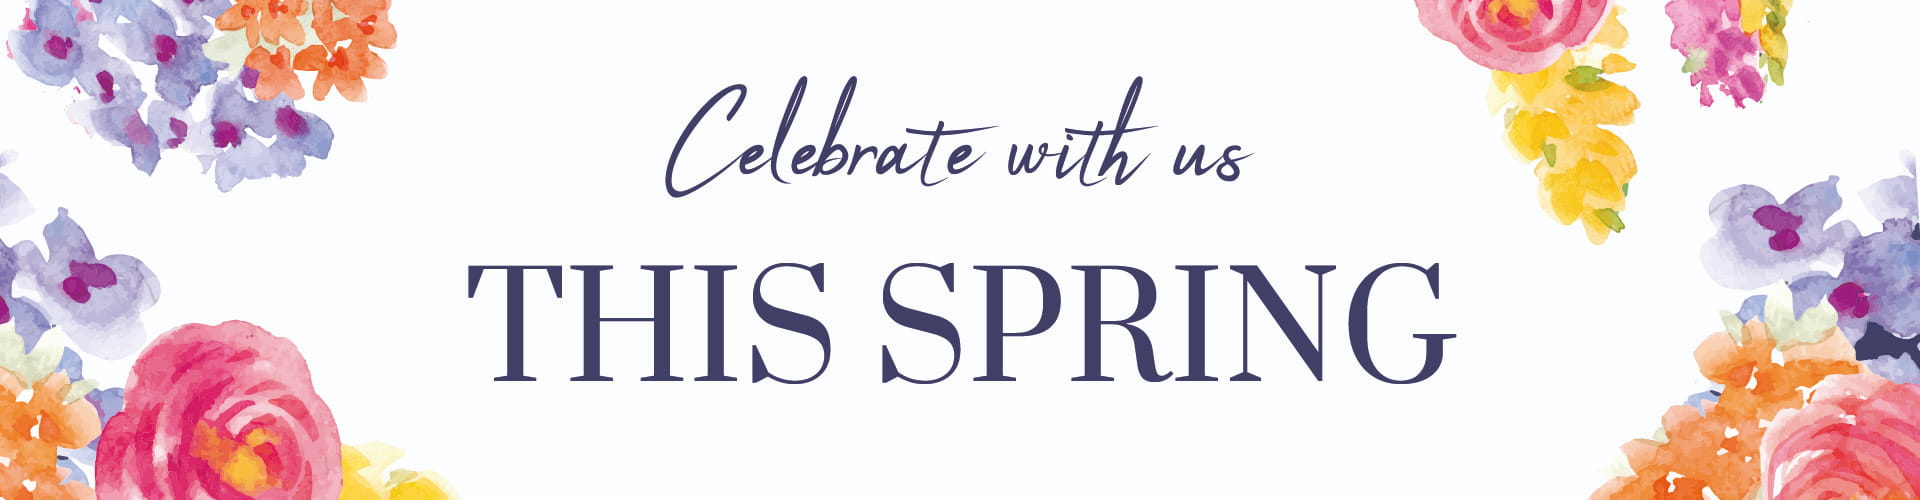 Spring Offers in  Chester-le-Street | The Chester Moor